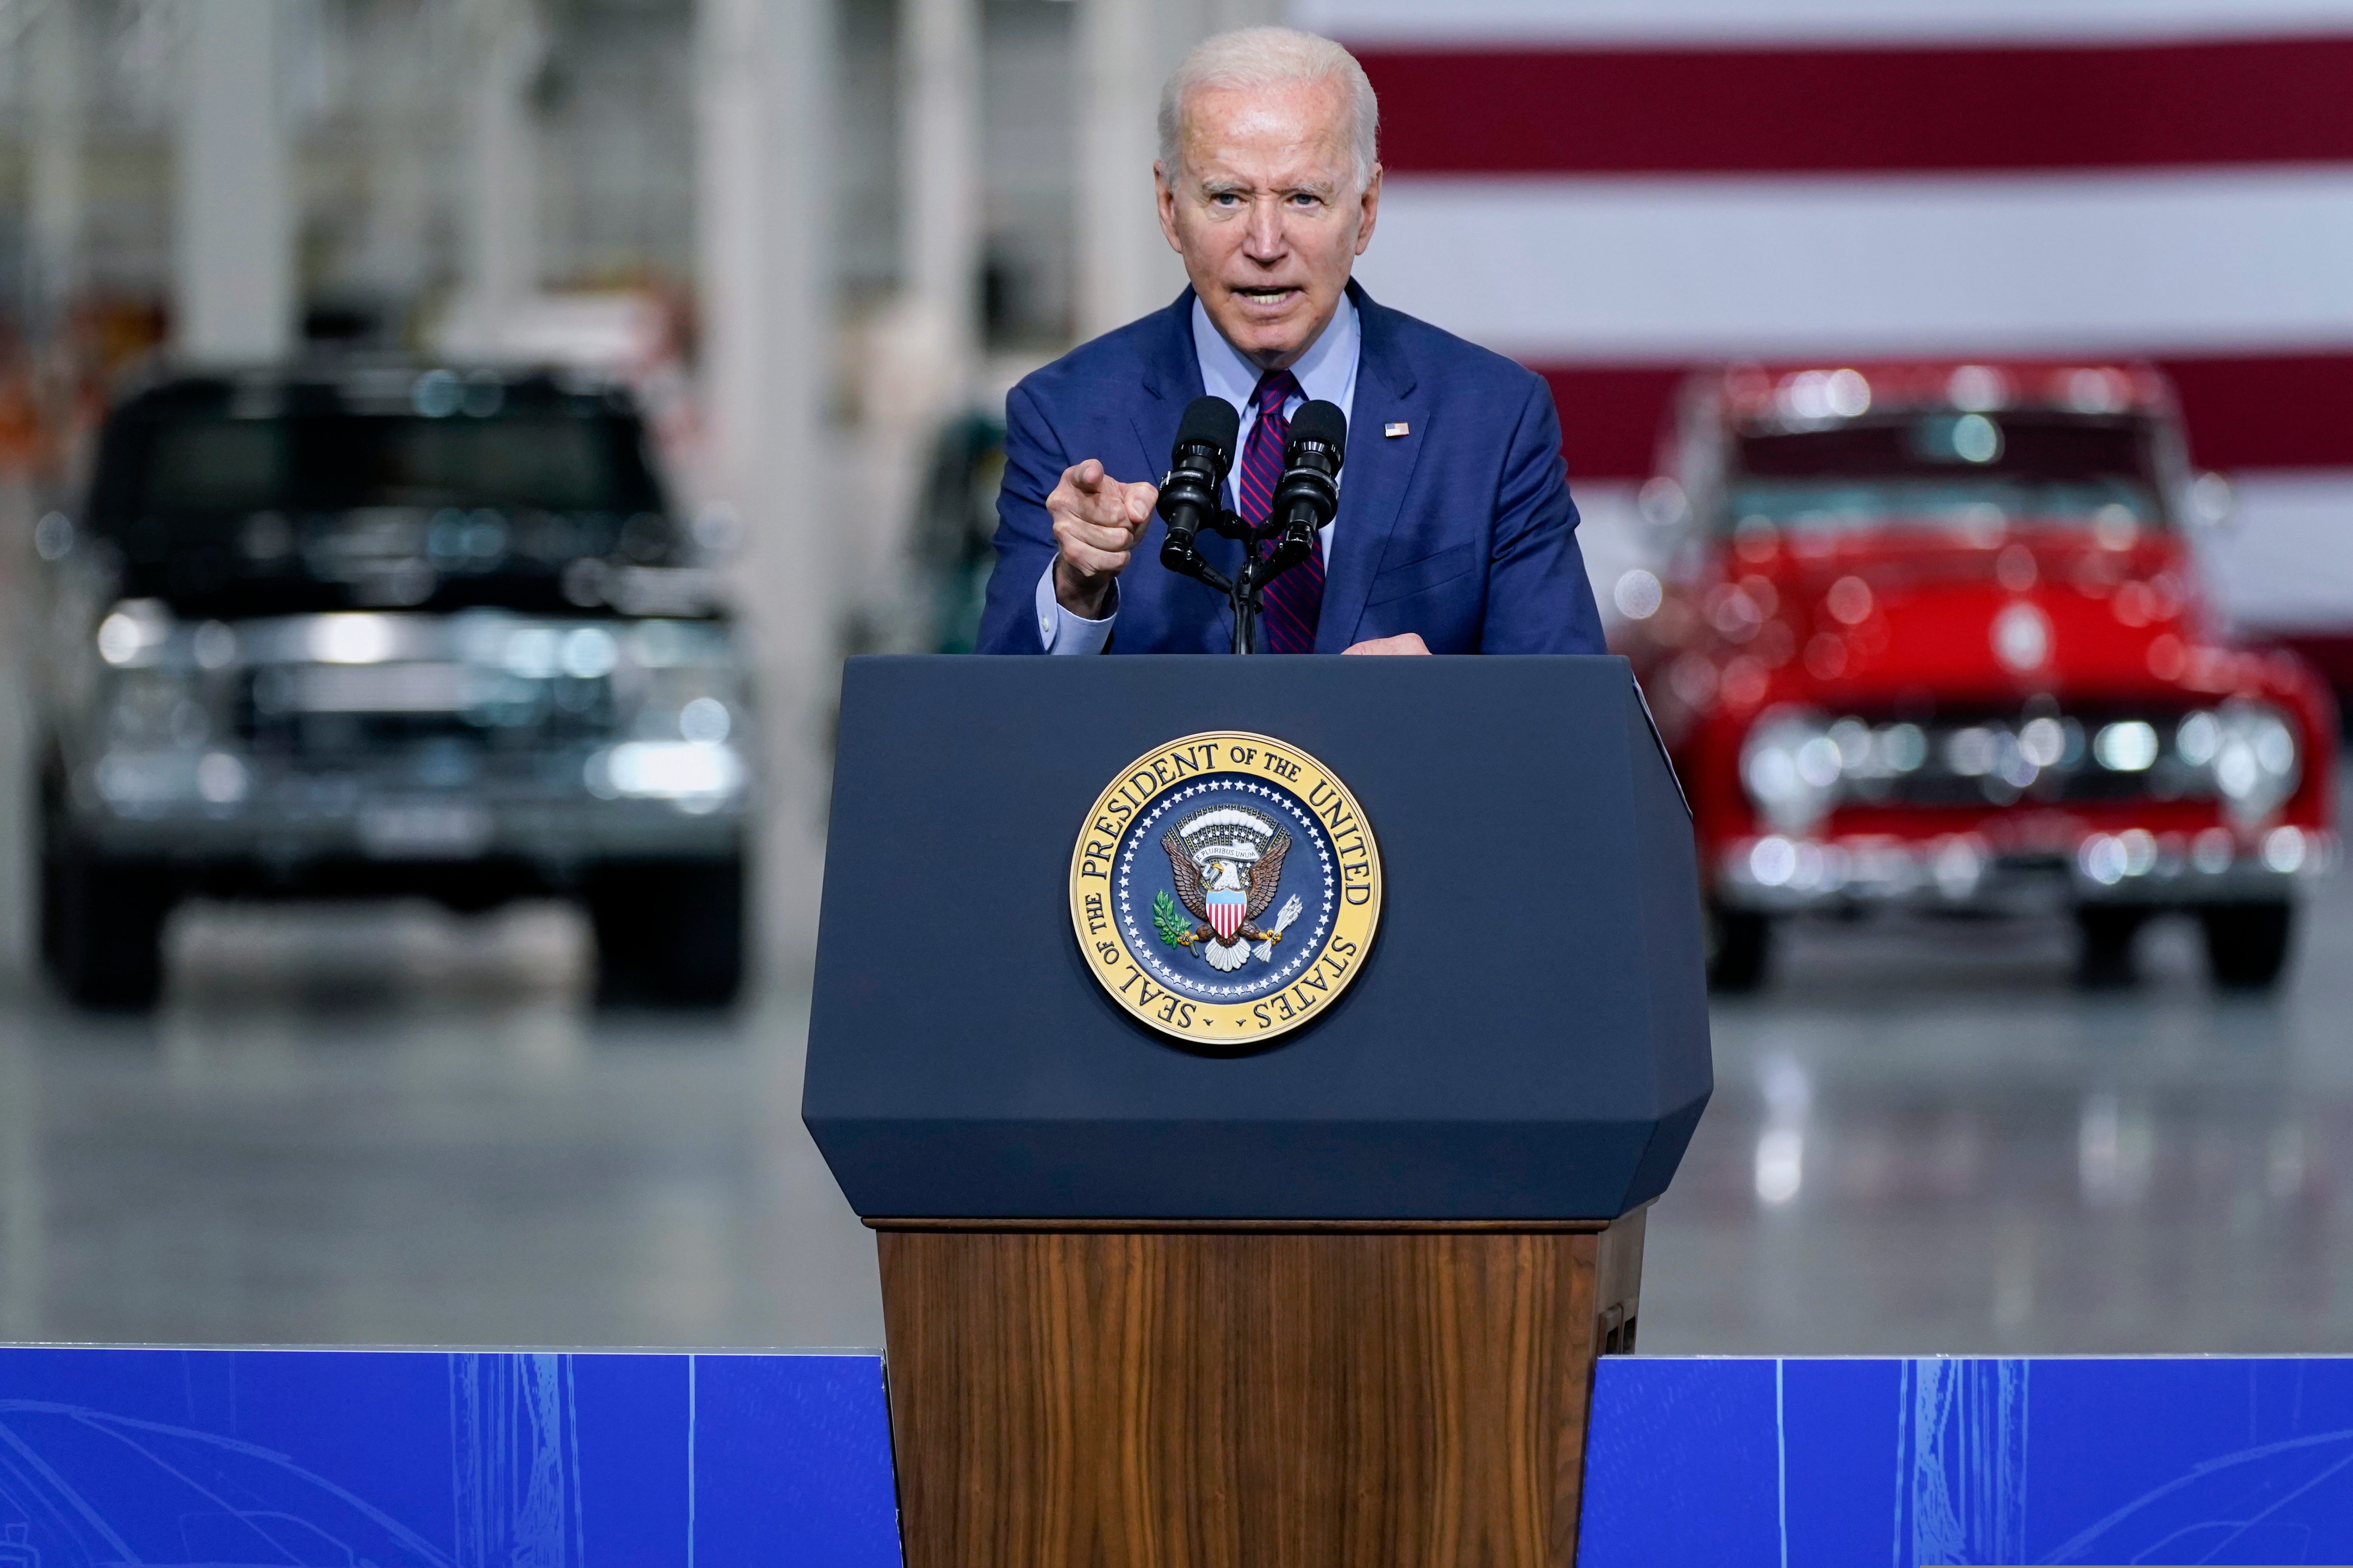 President Joe Biden speaks after a tour of the Ford Rouge EV Center, Tuesday, May 18, 2021, in Dearborn, Mich.